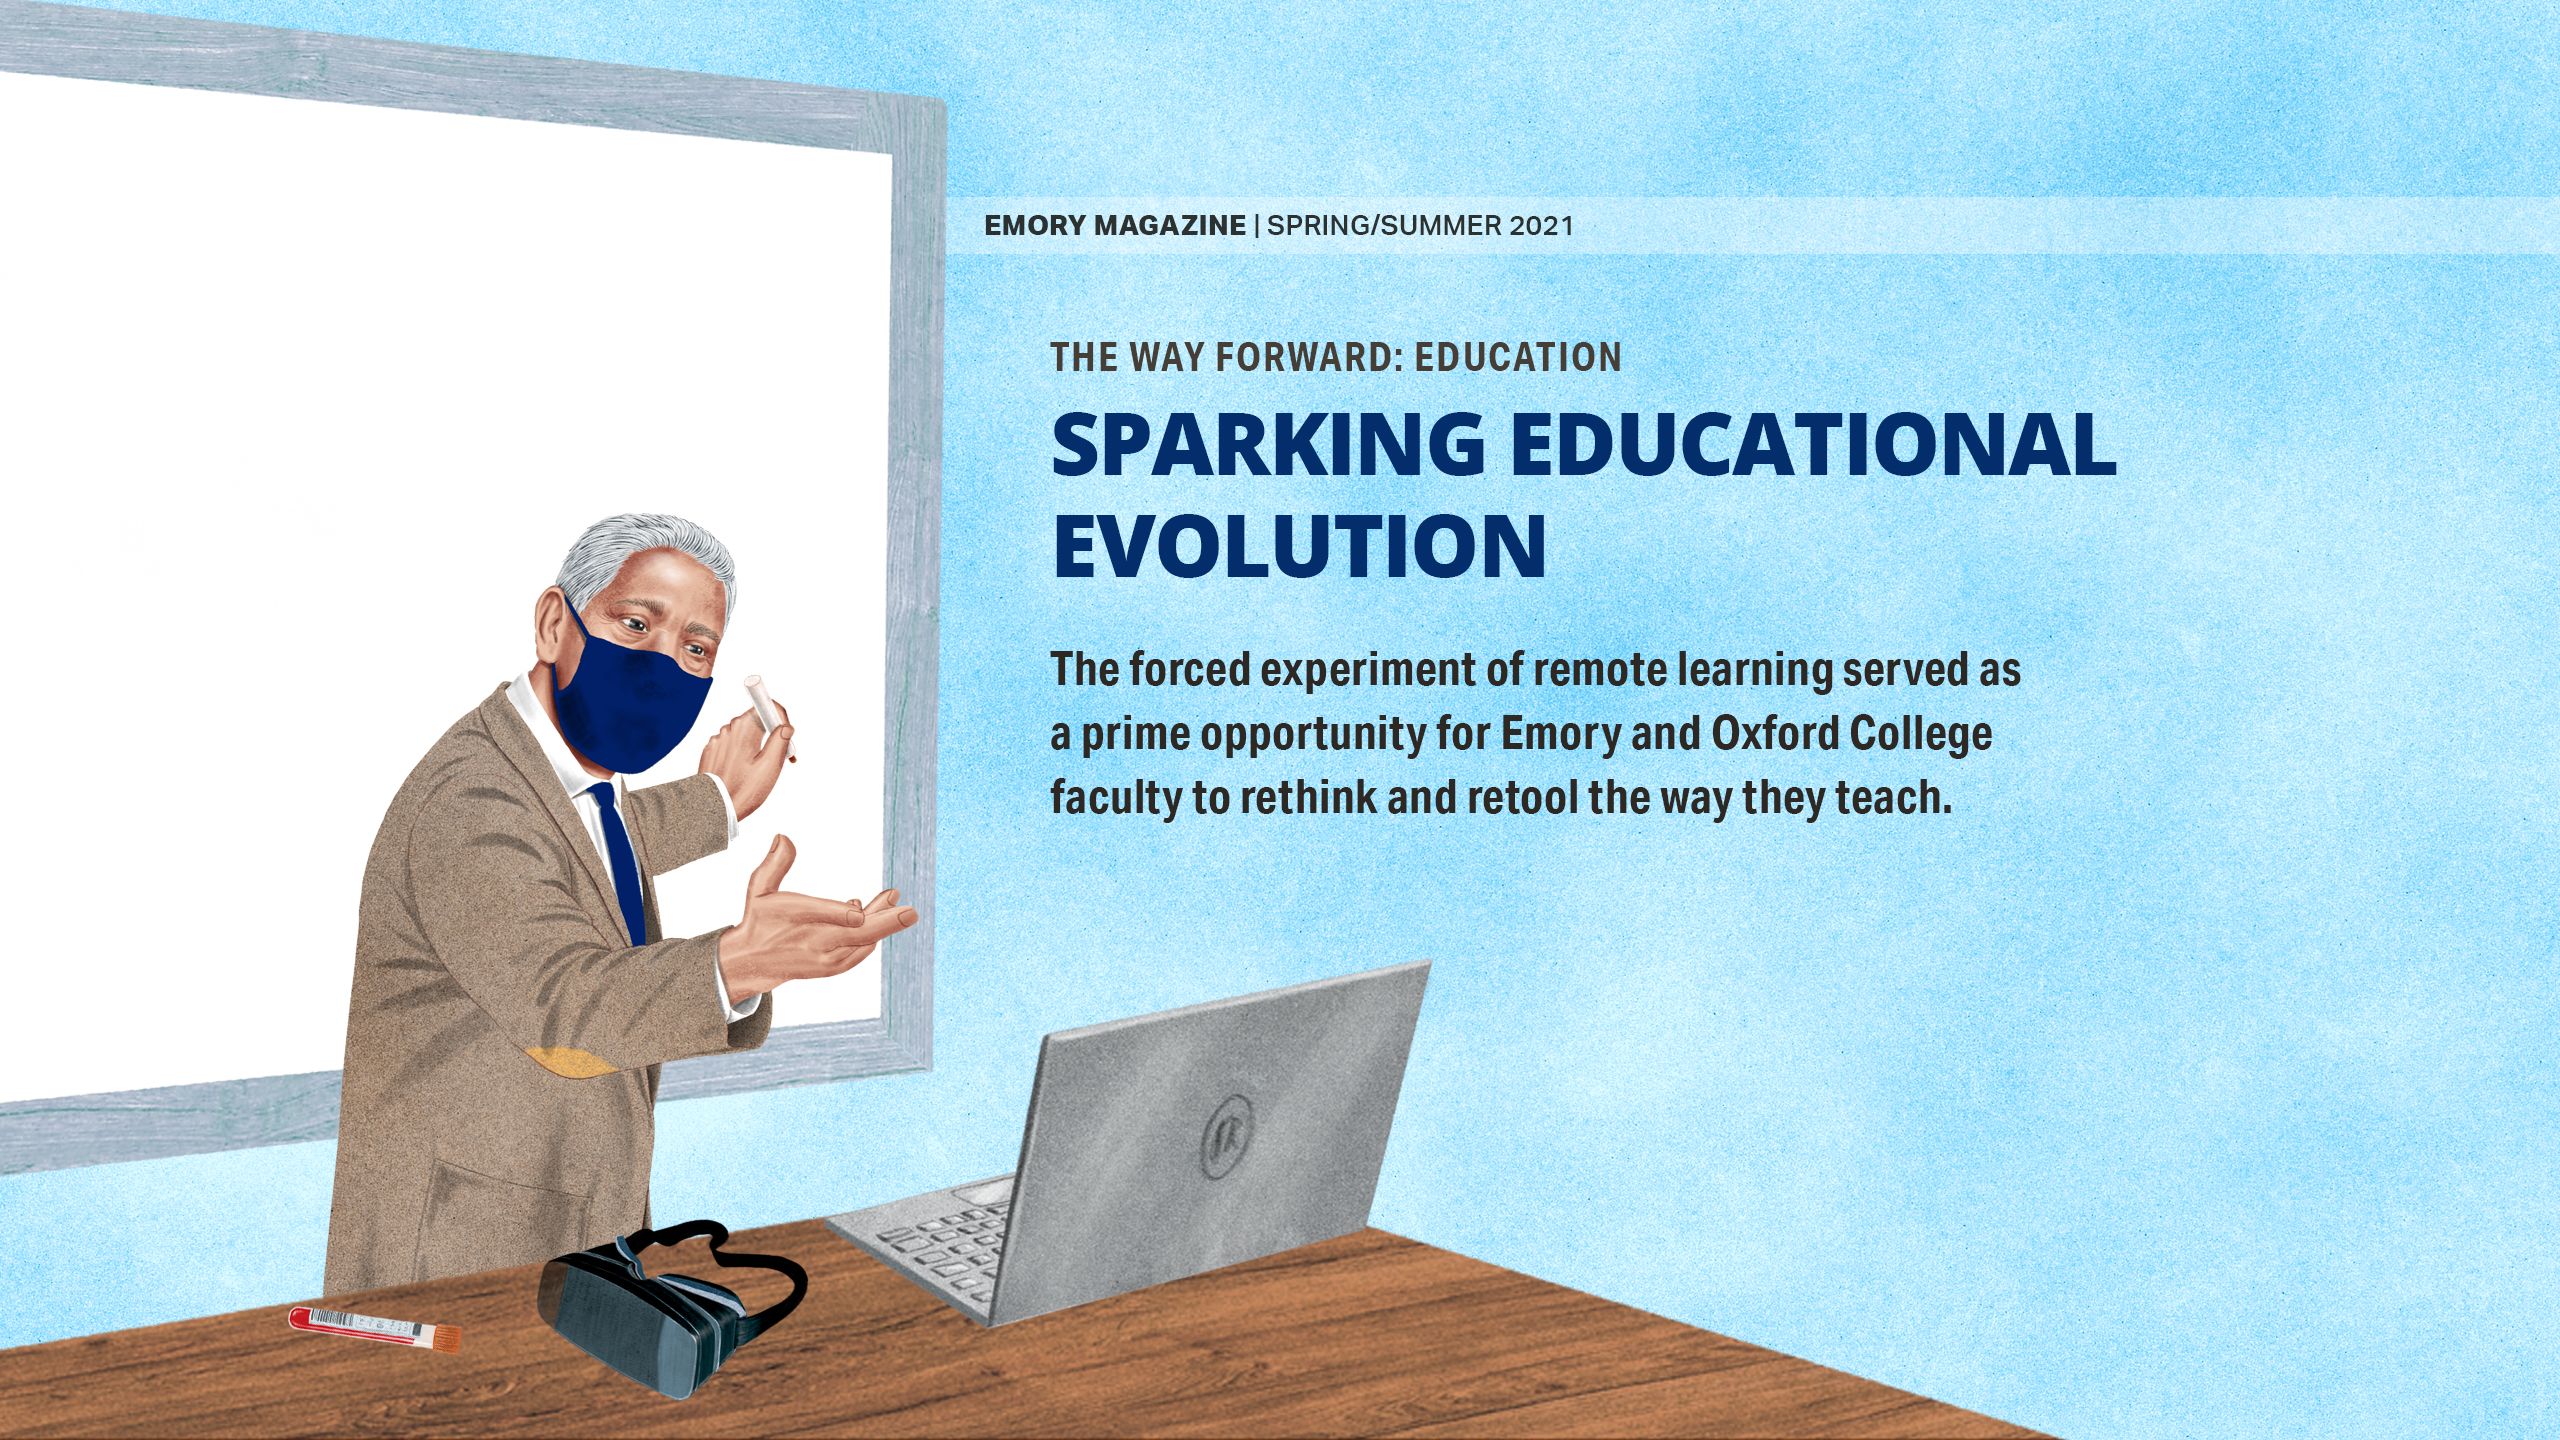 SPARKING EDUCATIONAL EVOLUTION  The forced experiment of remote learning served as a prime opportunity for Emory and Oxford College faculty to rethink and retool the way they teach.